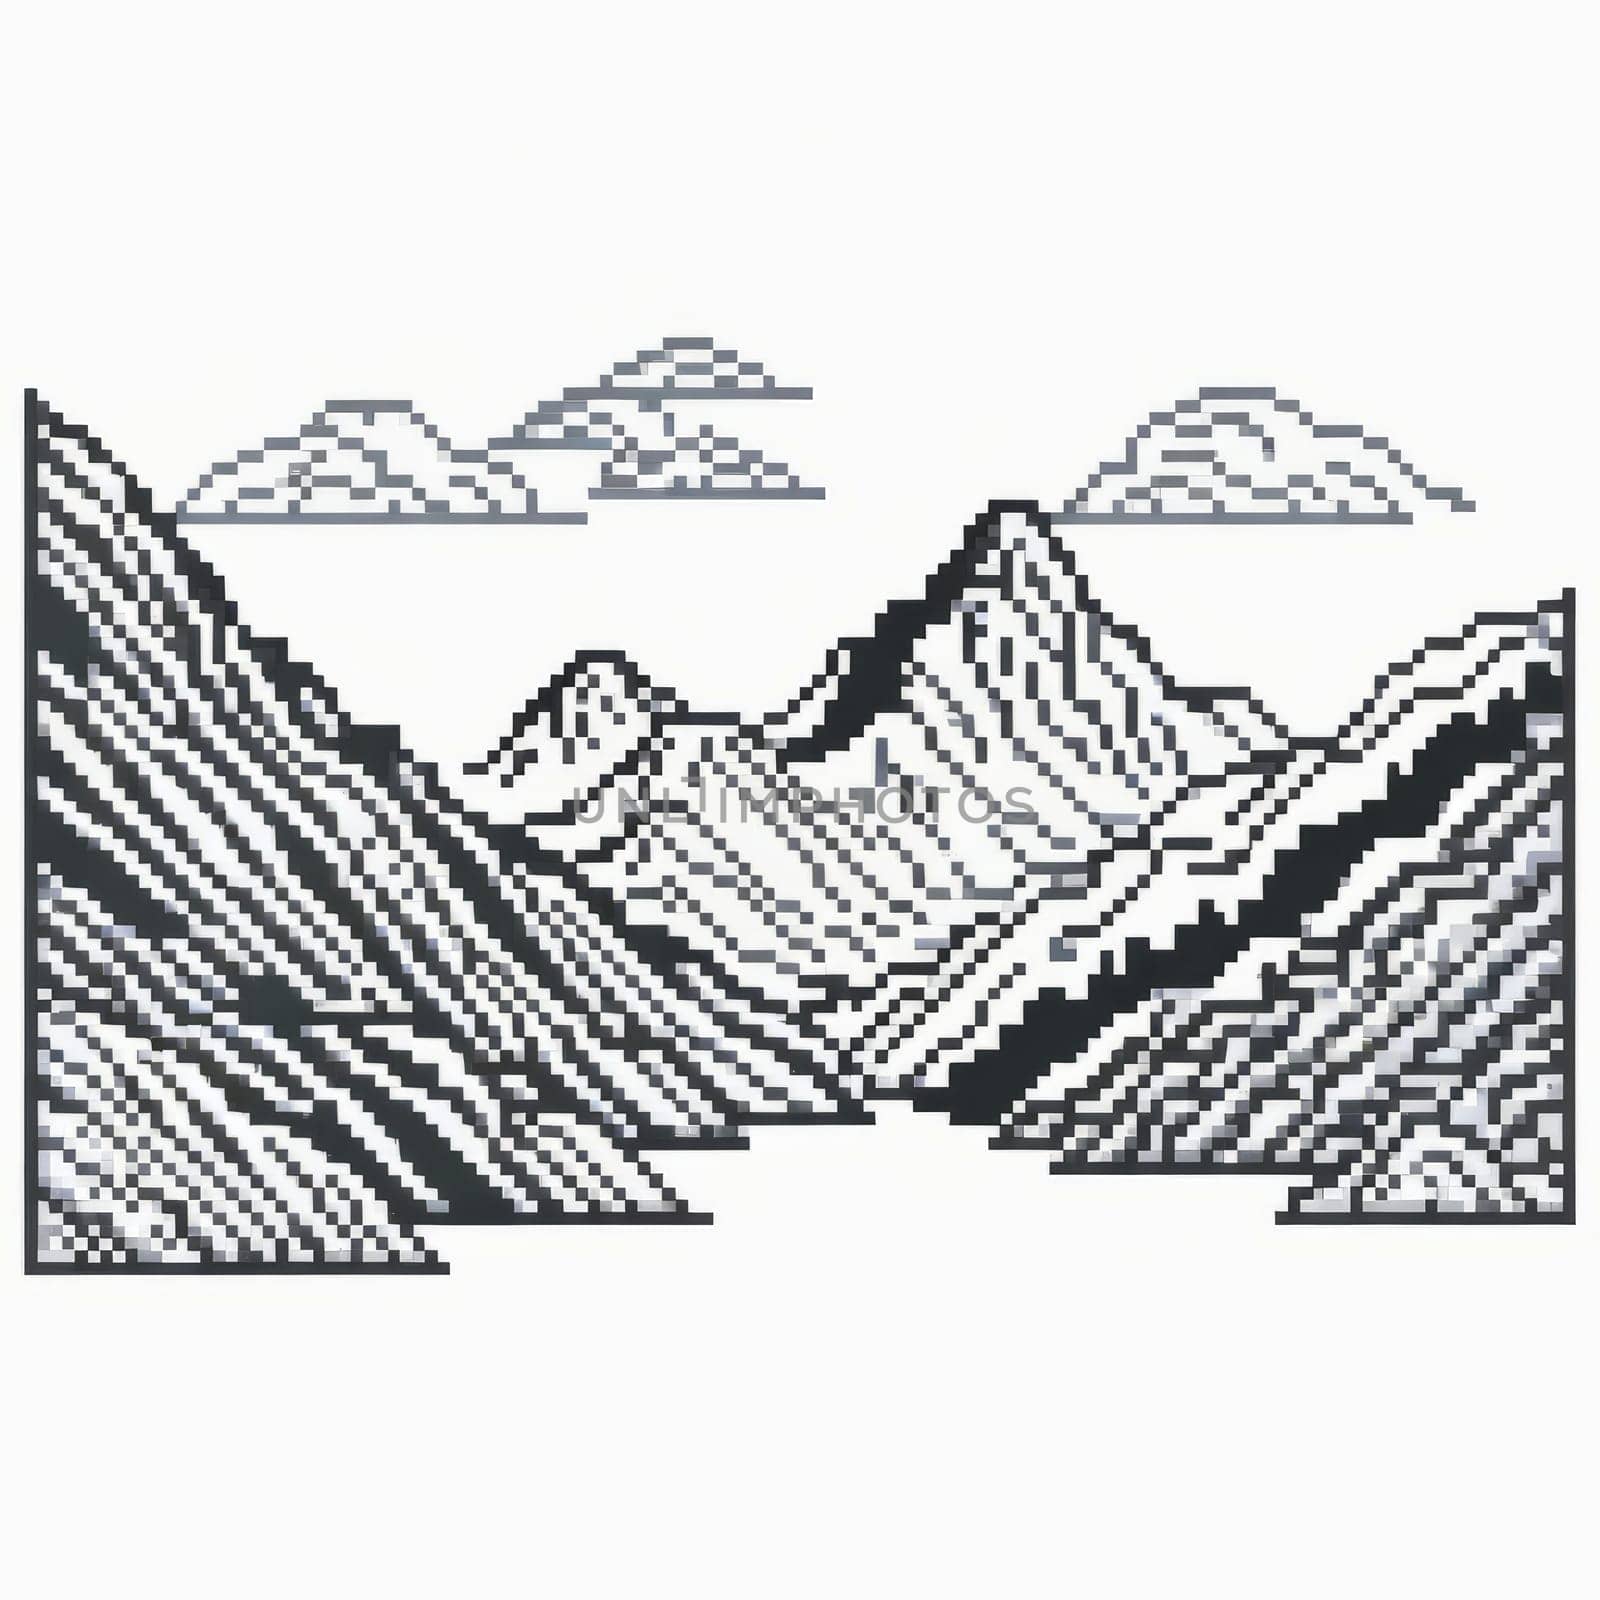 Serene black, white painting capturing majestic mountains, lush trees in harmonious contrast. Printed on merchandise like tshirts, mugs, notebooks for nature lovers, travel brochures promoting. by Angelsmoon